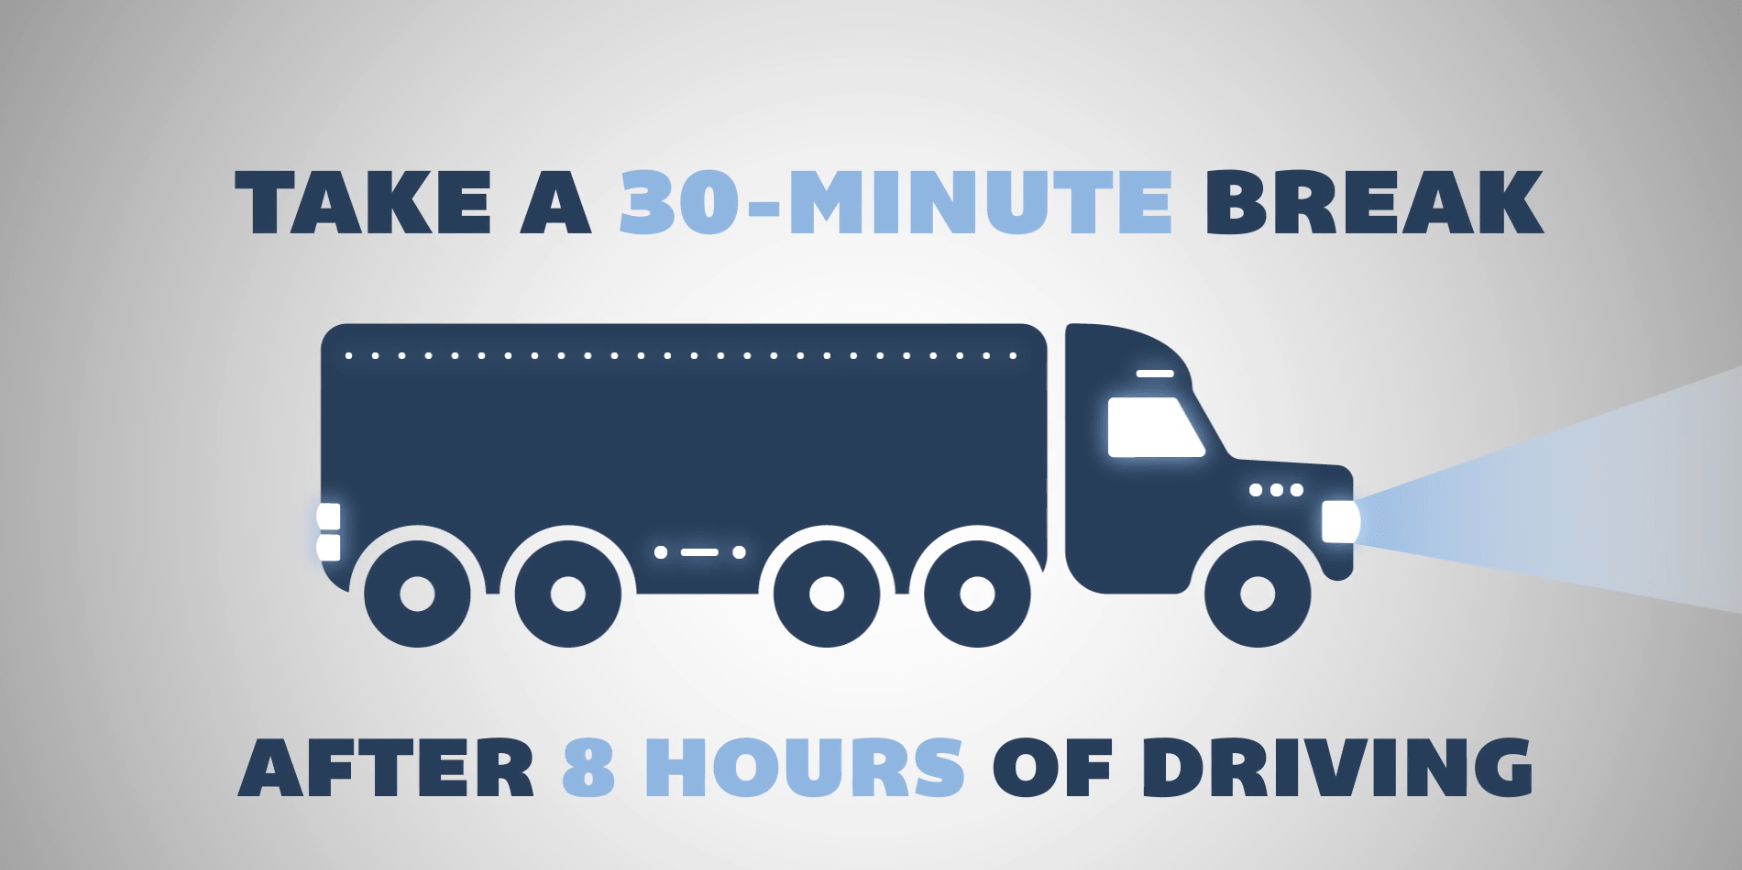 How Many Hours Can A Truck Driver Drive?